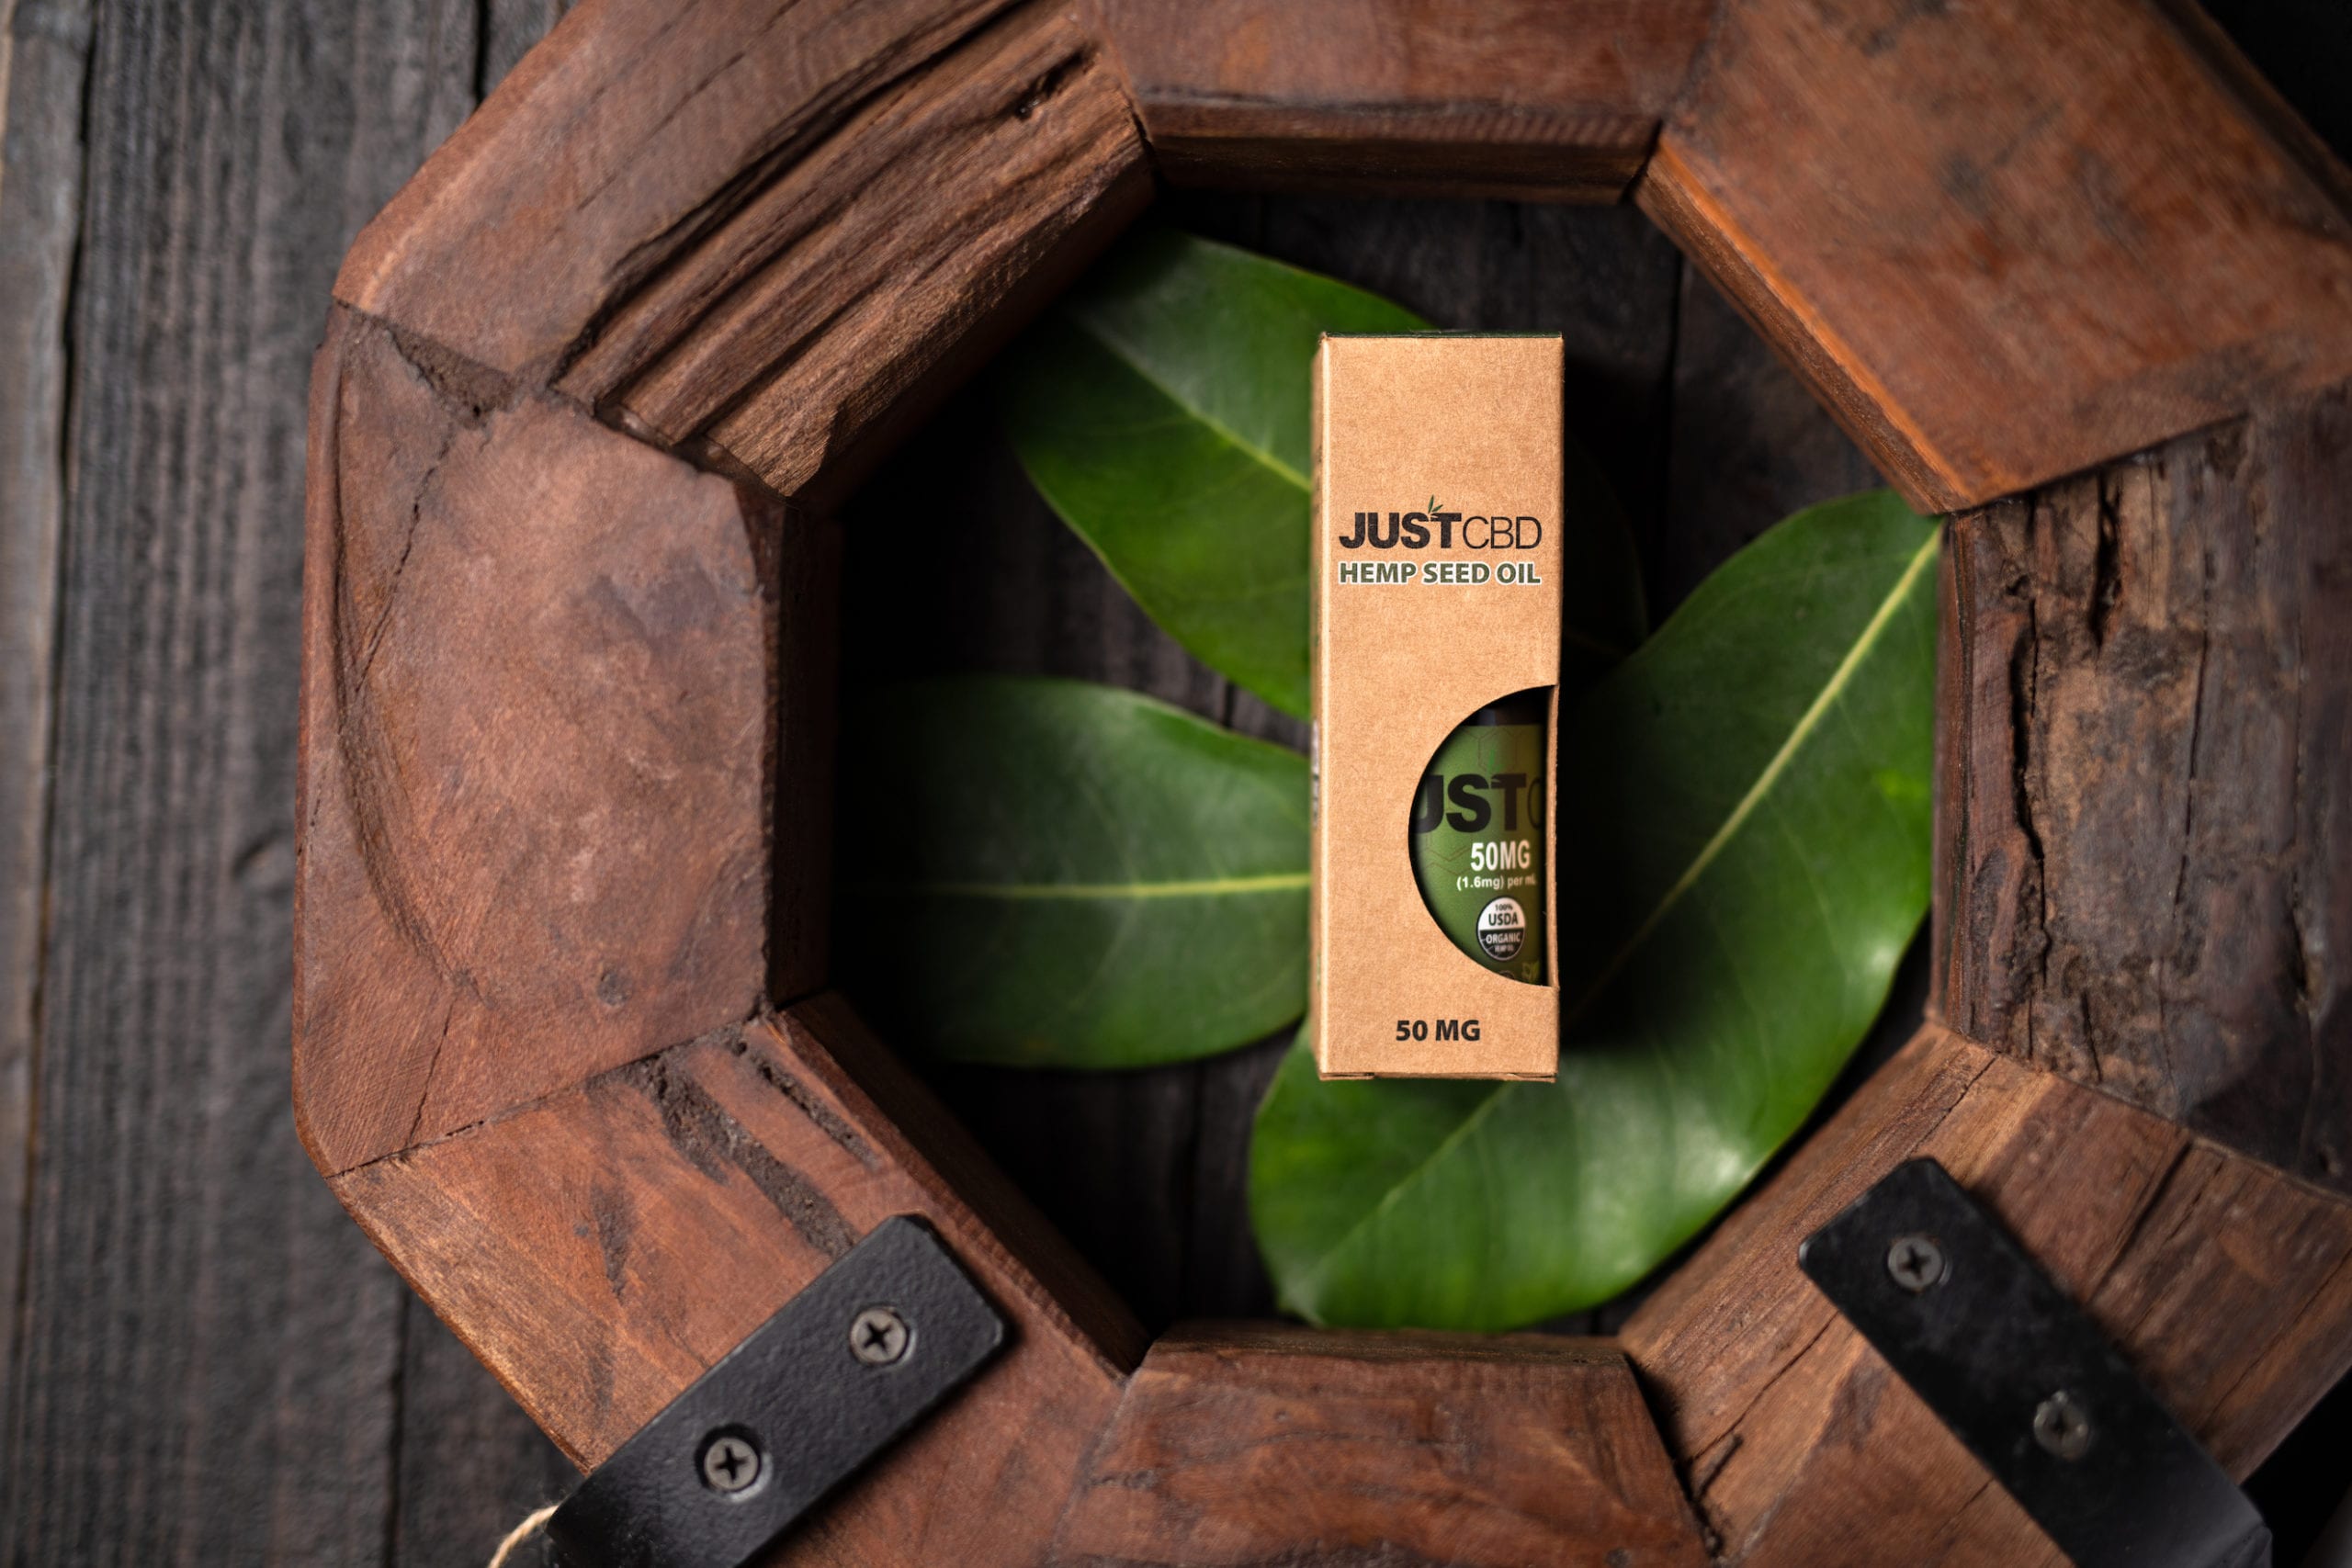 JustCBD Product Photography and Just CBD Products JUSTCBD Hemp Seed Oil package on display on green plant leaves surrounded by wood blocks